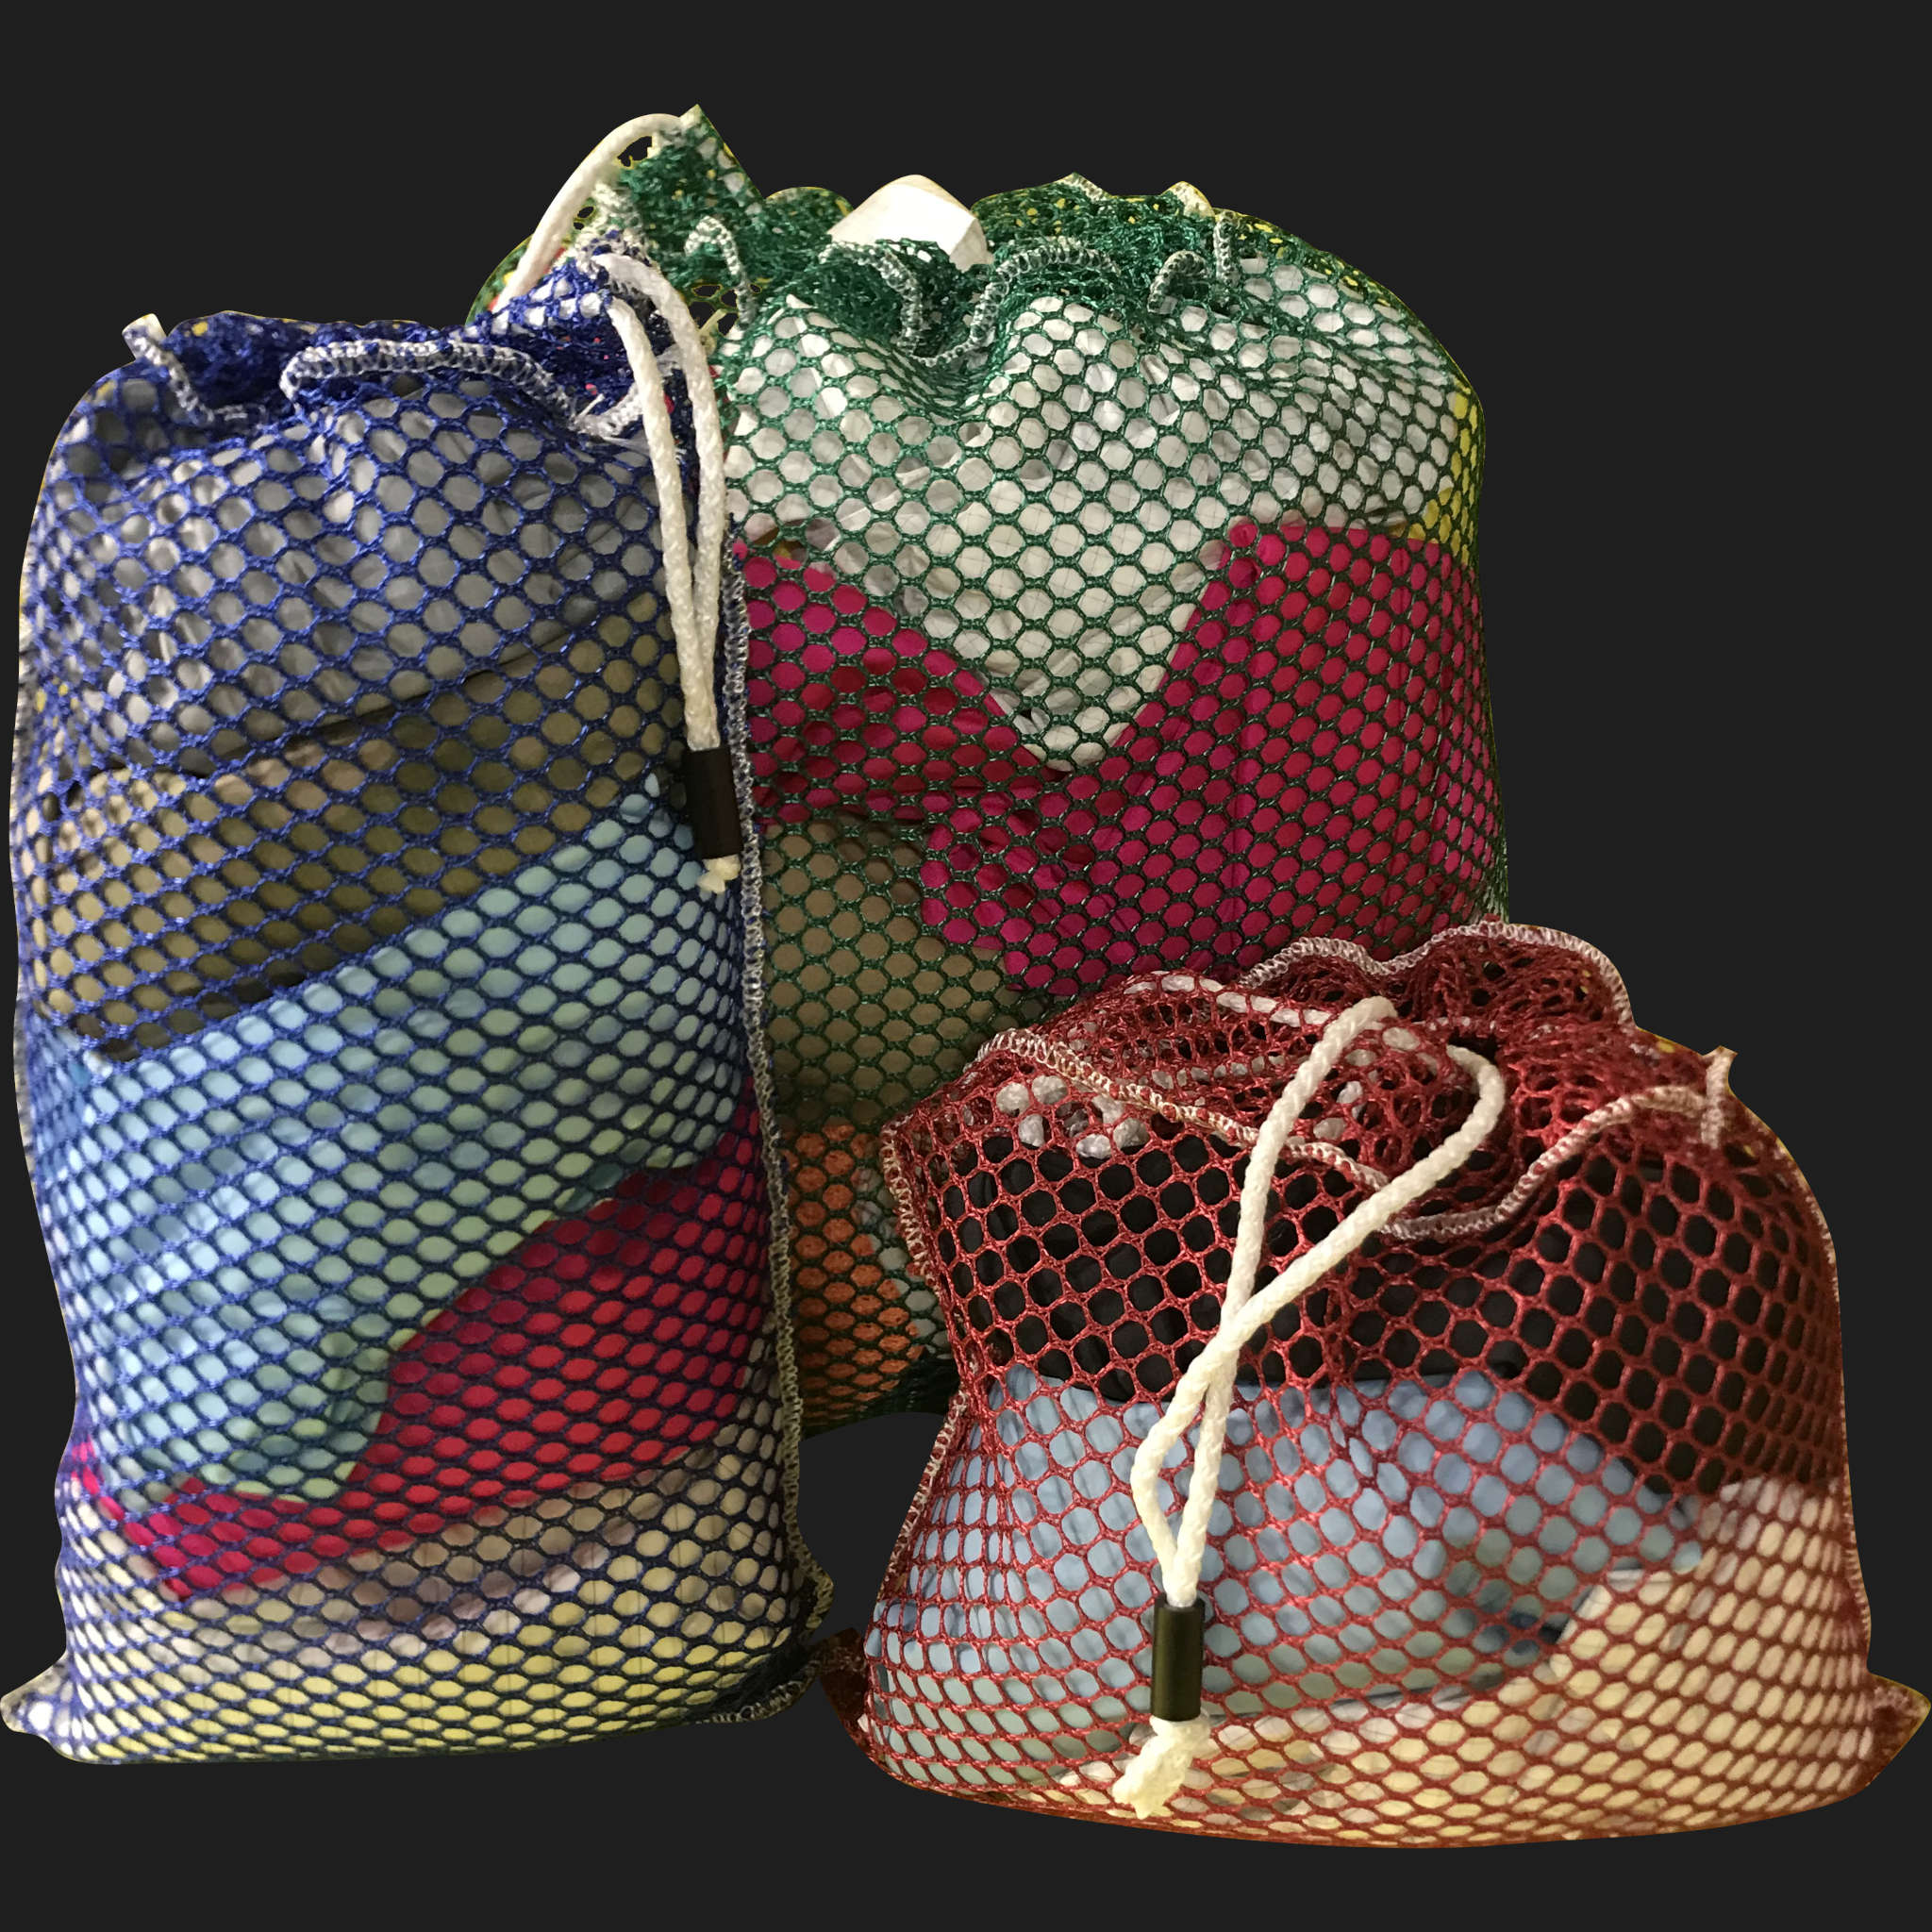 22" x 38" Customized Mesh-Net-Laundry Bags Heavy Duty with Cord and barrellock closure